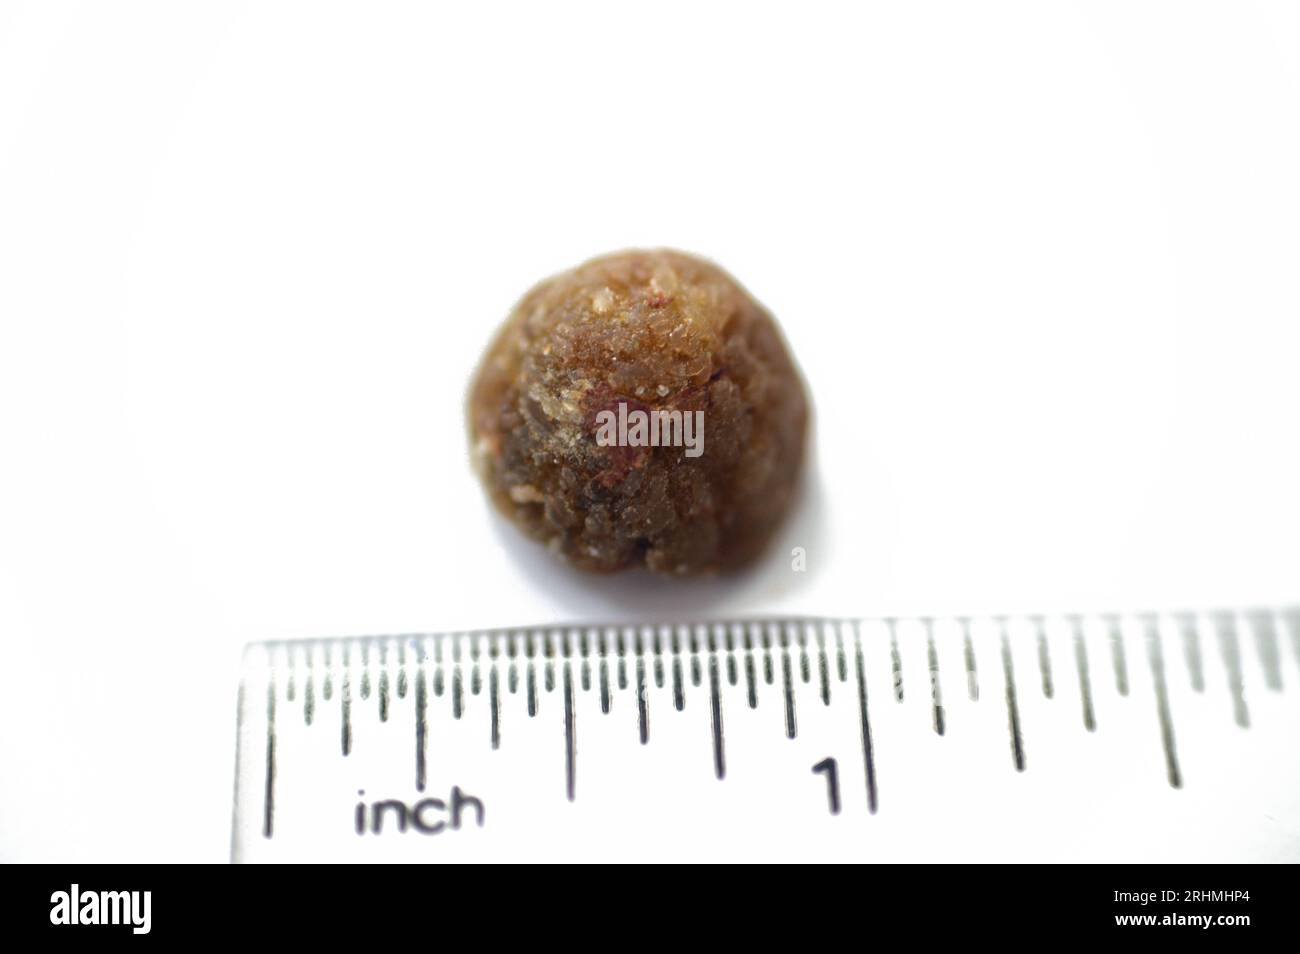 Large gallstone removed surgically after laparoscopic cholecystectomy, Gallstones are hardened deposits of digestive fluid that can form in gallbladde Stock Photo